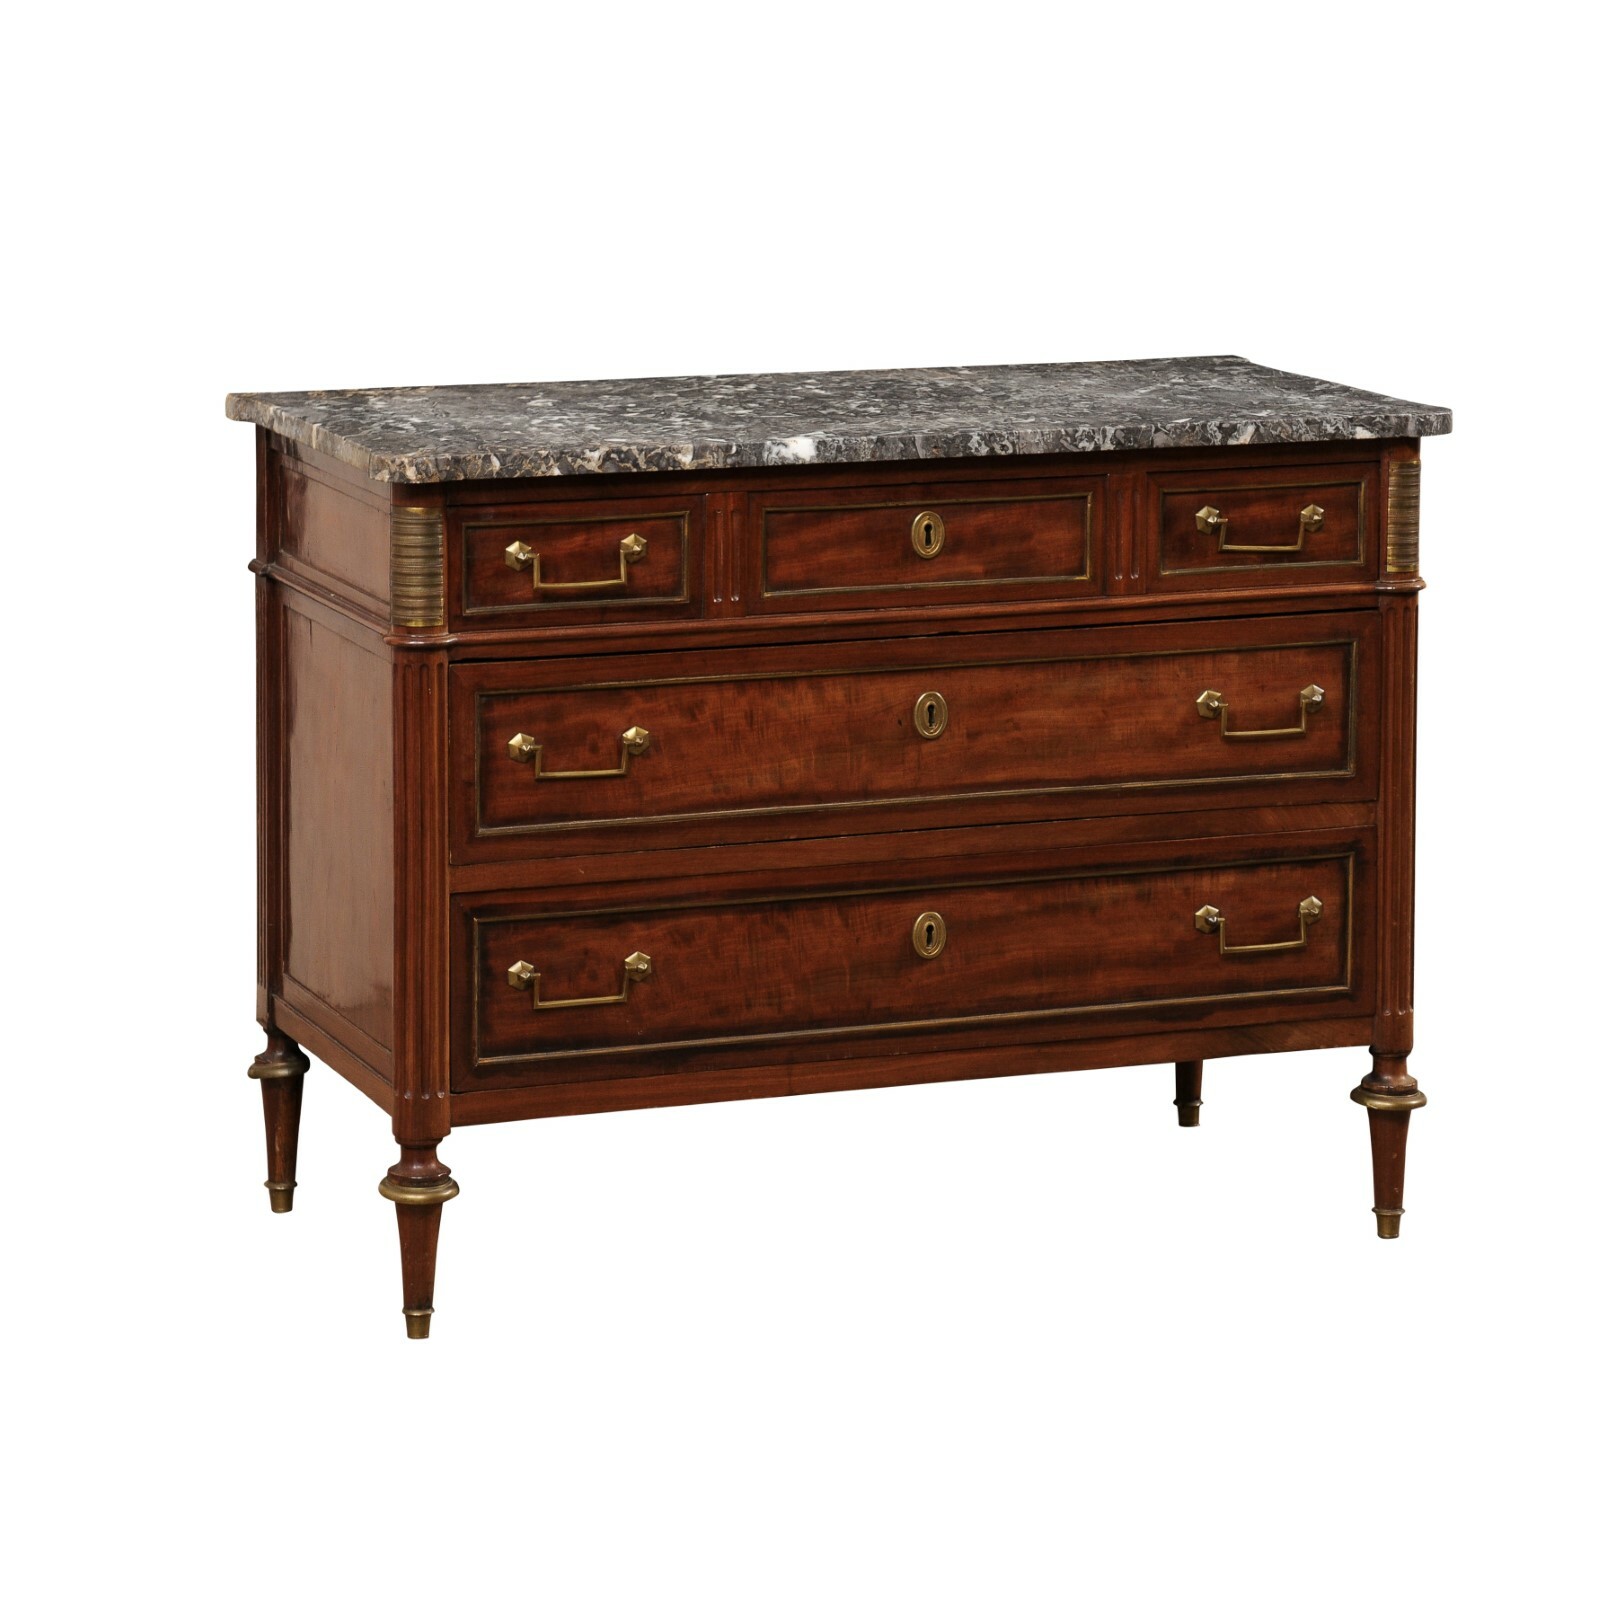 French Period Neoclassic Marble-Top Commode